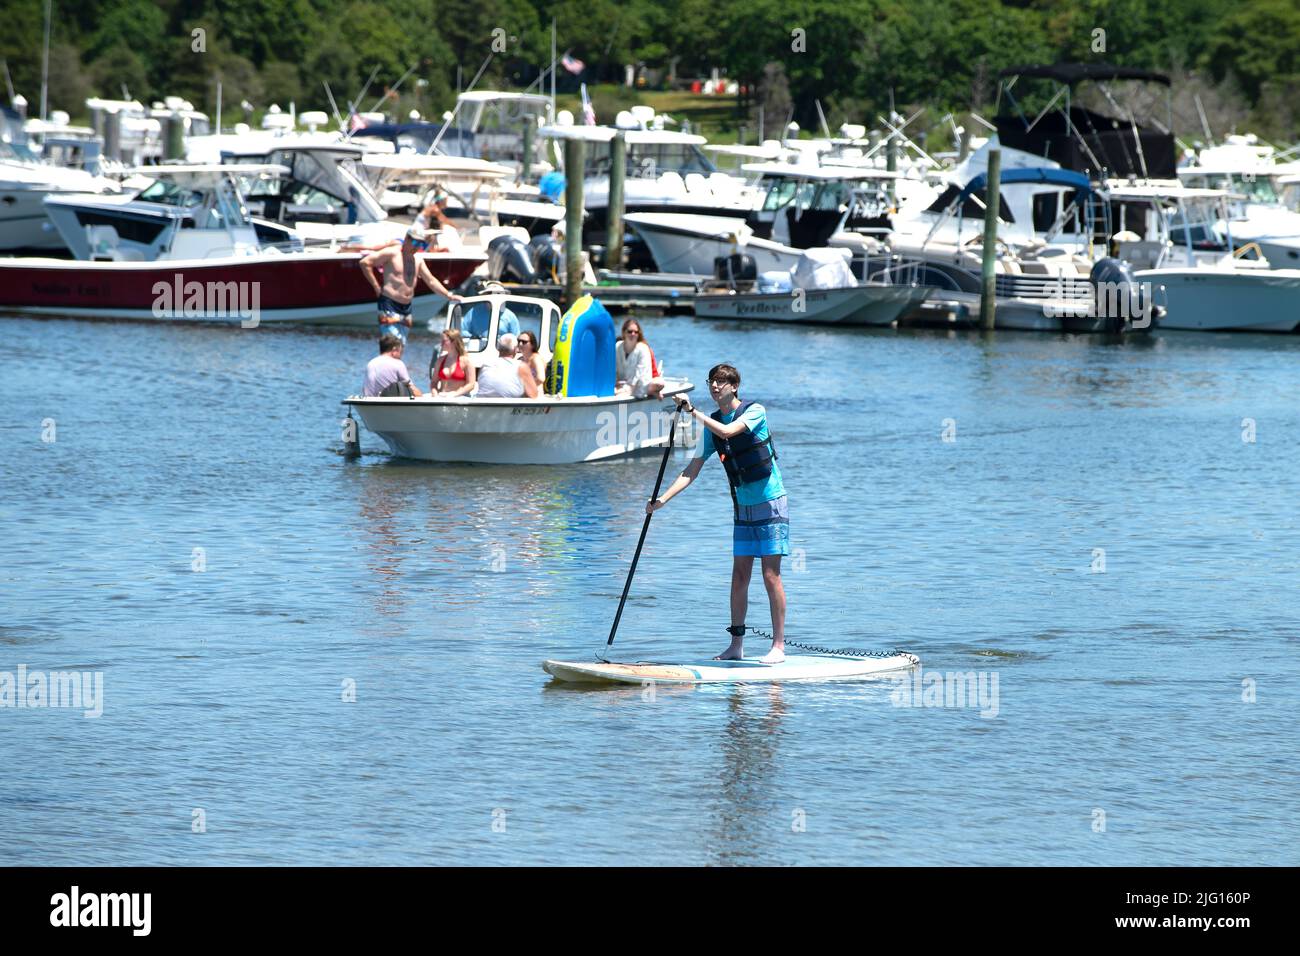 Paddleboarding and recreational boating in West Dennis, Massachusetts, Cape Cod, USA Stock Photo